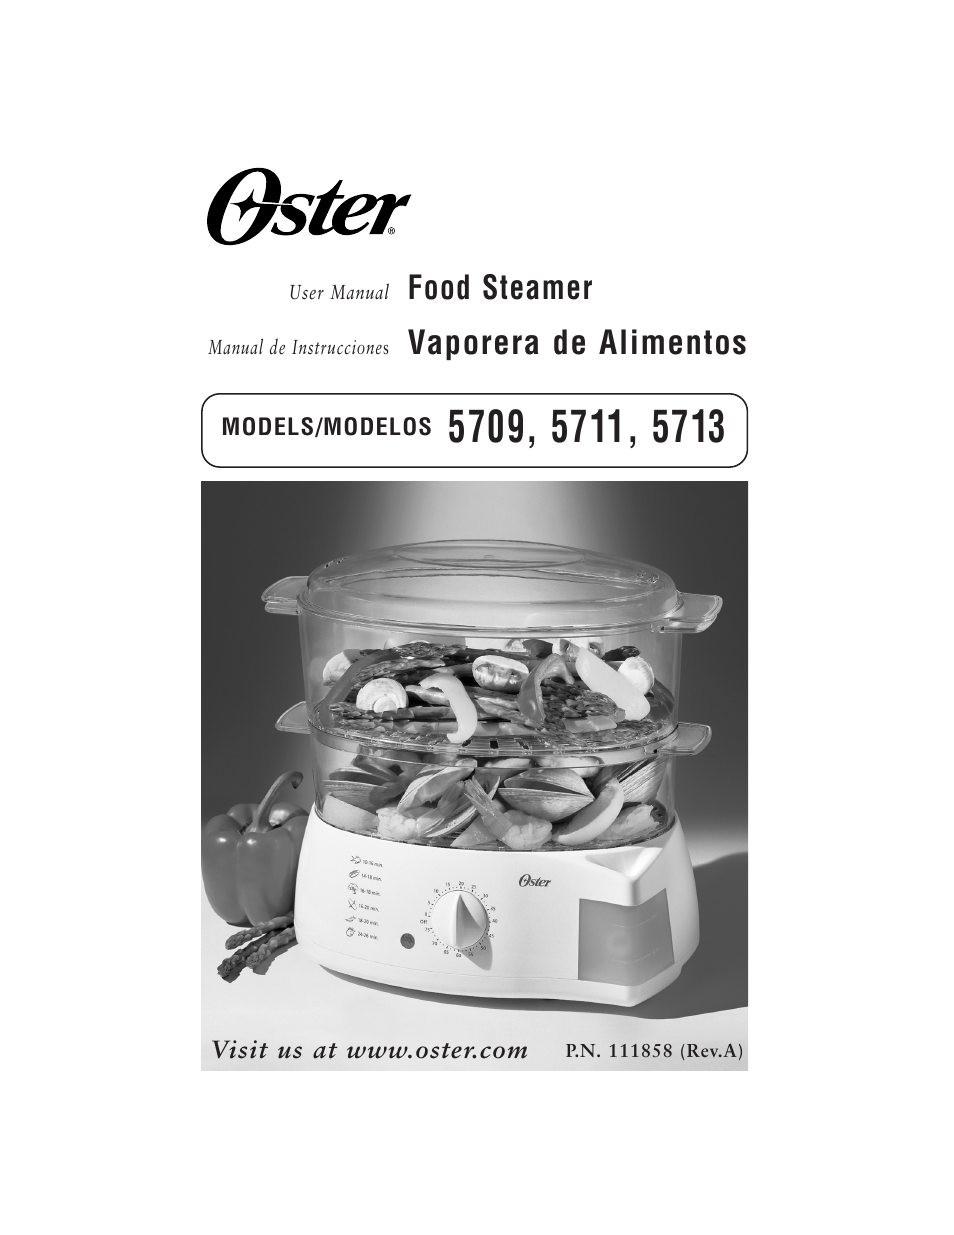 Oster 5711 User Manual | 23 pages | Also for: 5709, 5713